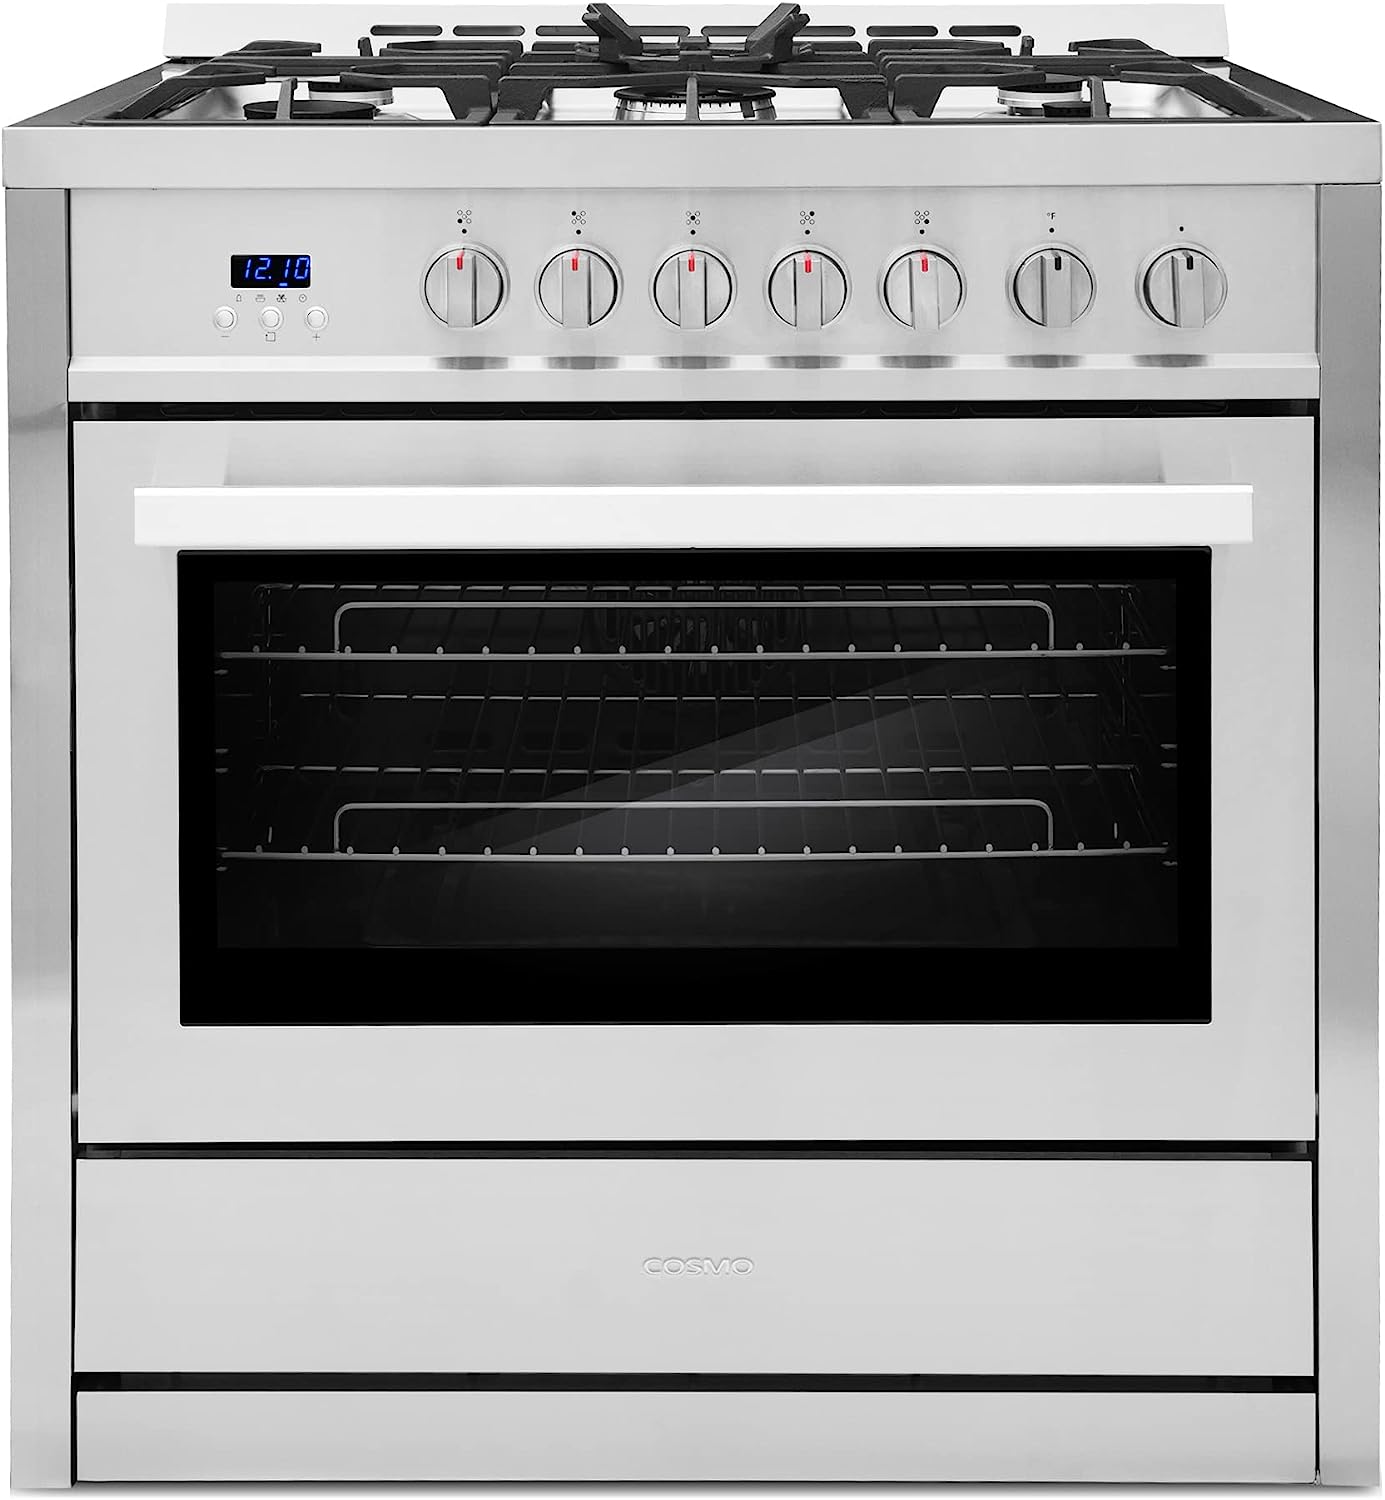 COSMO COS-965AGC 36 in. Gas Range with 5 Burner [...]